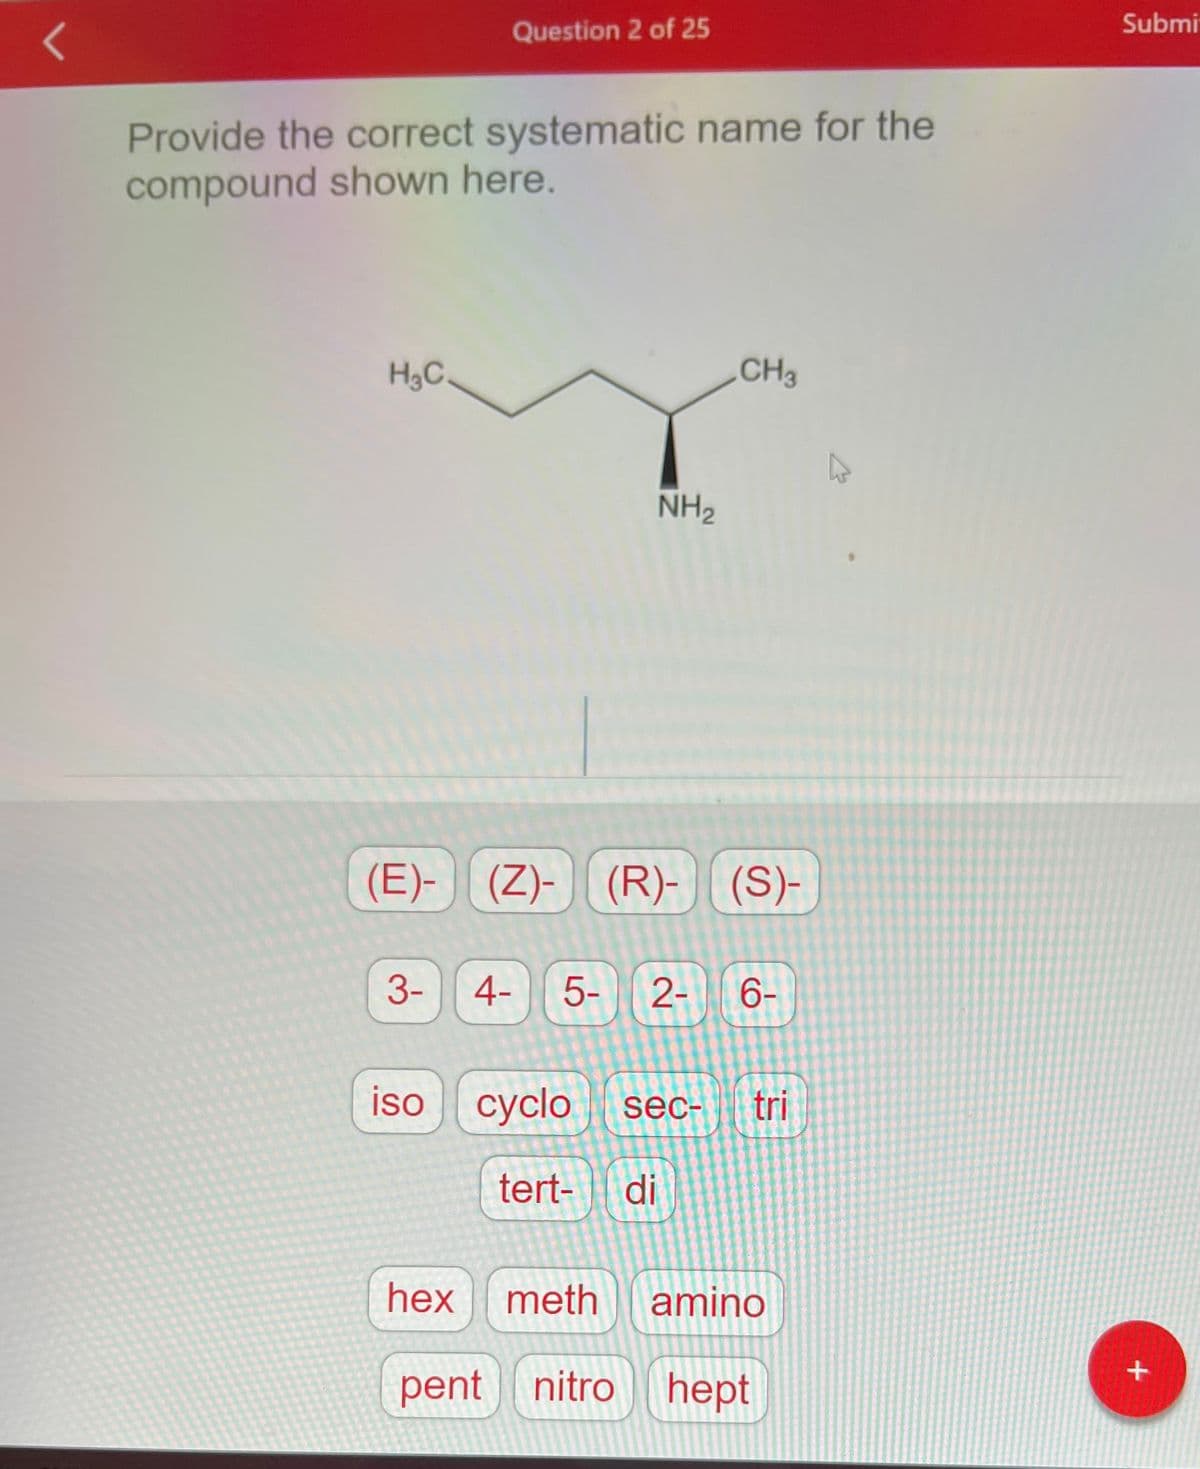 Provide the correct systematic name for the
compound shown here.
H3C_
Question 2 of 25
(E)-
3- 4-
(Z)- (R)- (S)-
NH₂
iso cyclo
CH3
5- 2- 6-
tert- di
sec- tri
hex meth amino
pent nitro hept
Submi
+